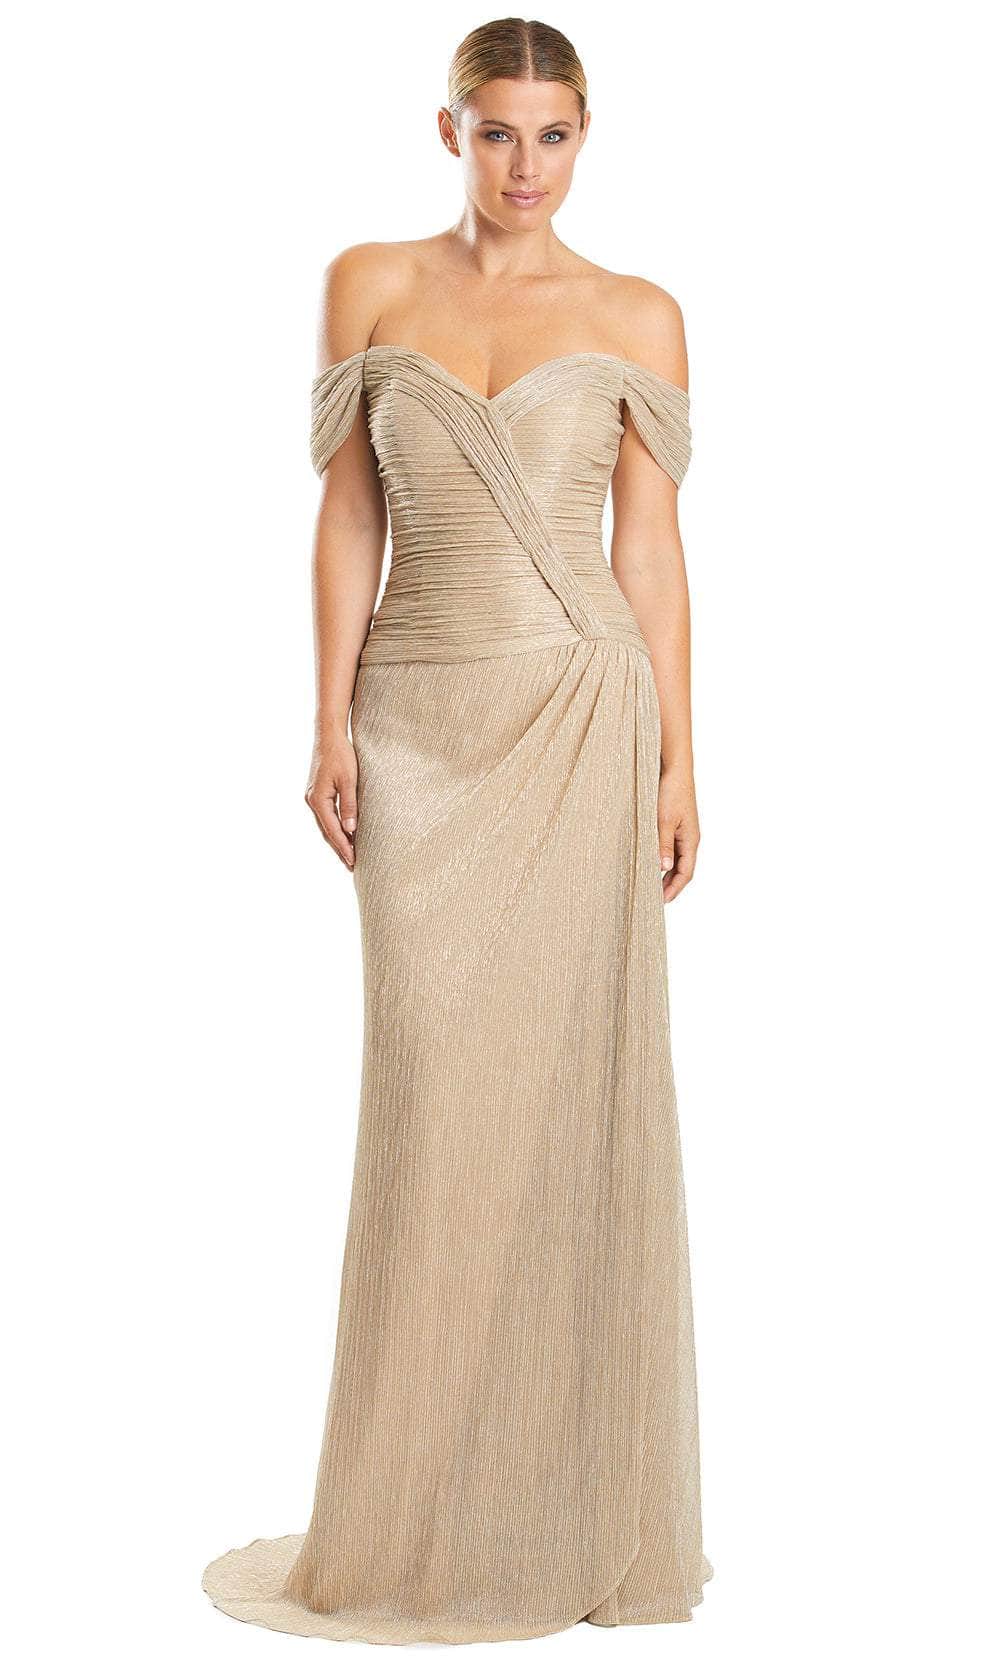 Alexander by Daymor 1858F23 - Ruched Prom Dress 00 / Gold